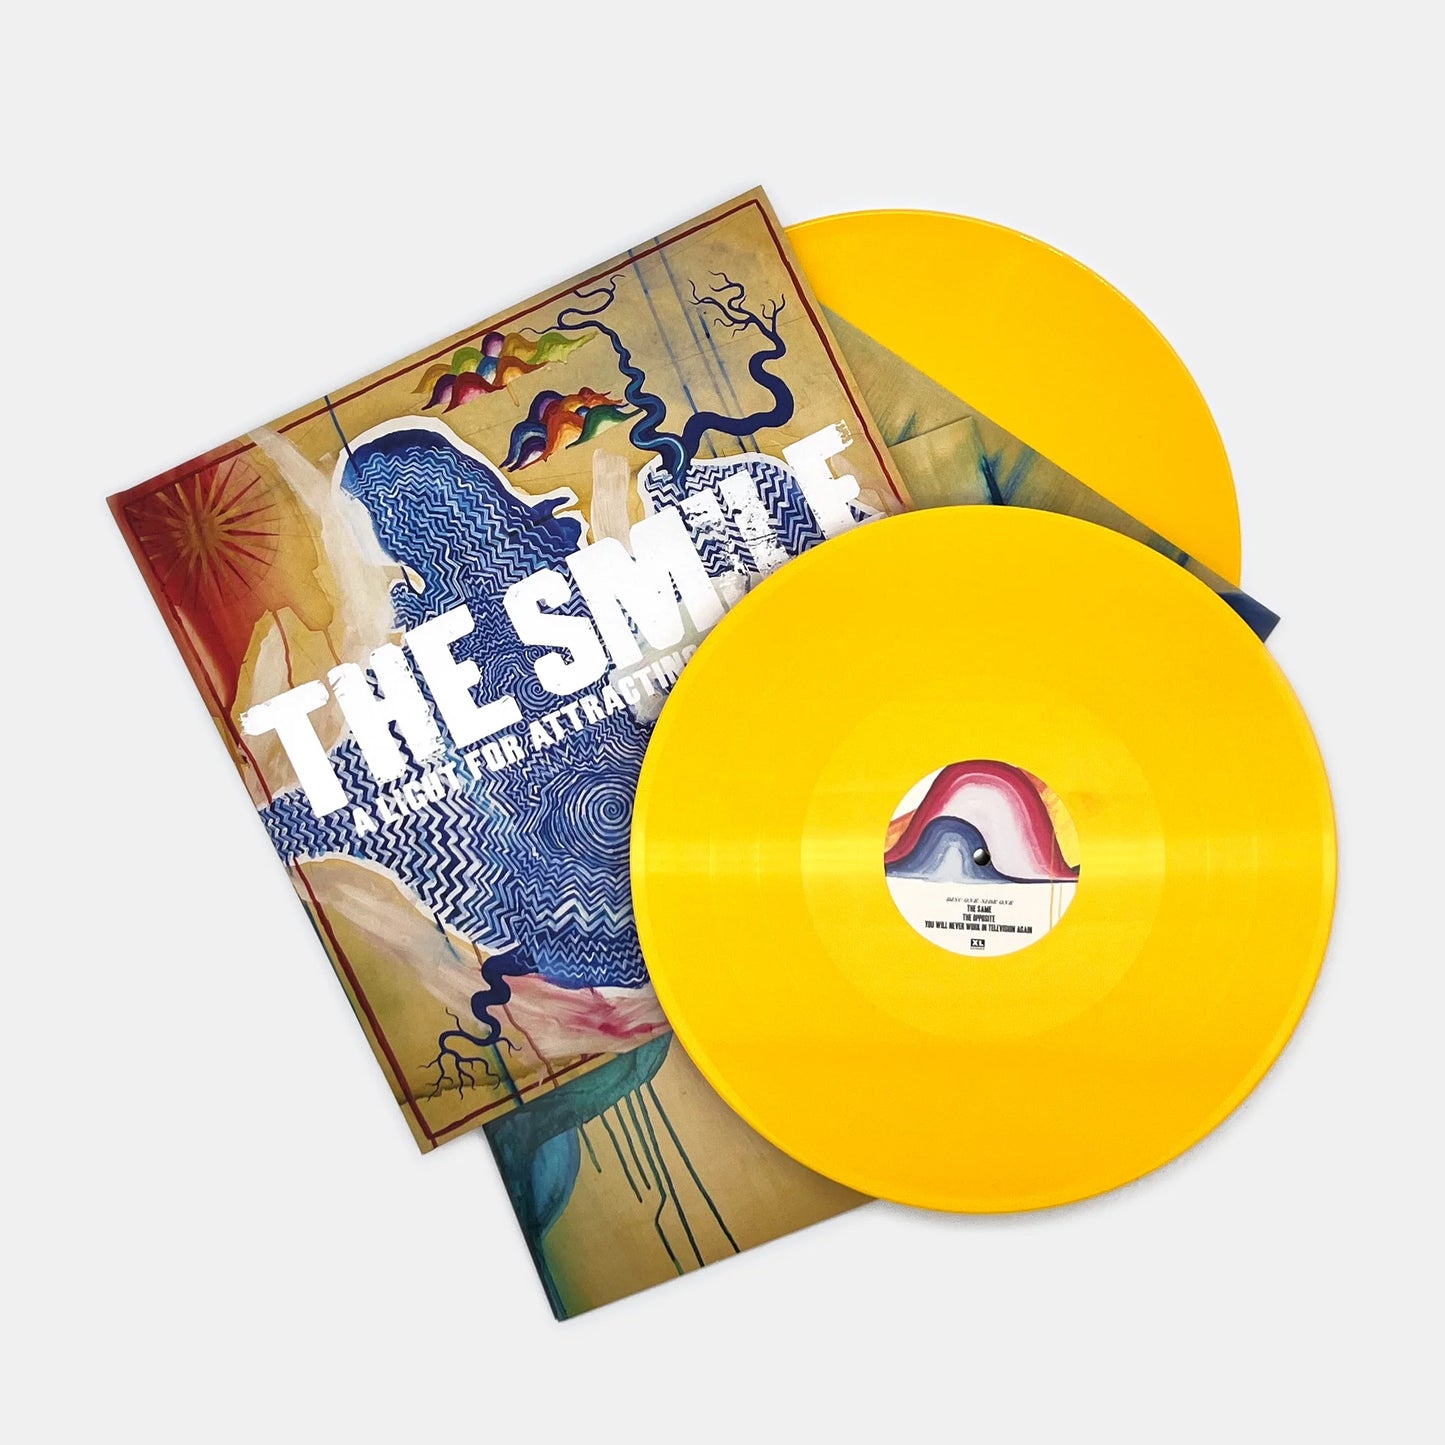 The Smile - A Light For Attracting Attention (Limited Edition on Double Yellow Vinyl)